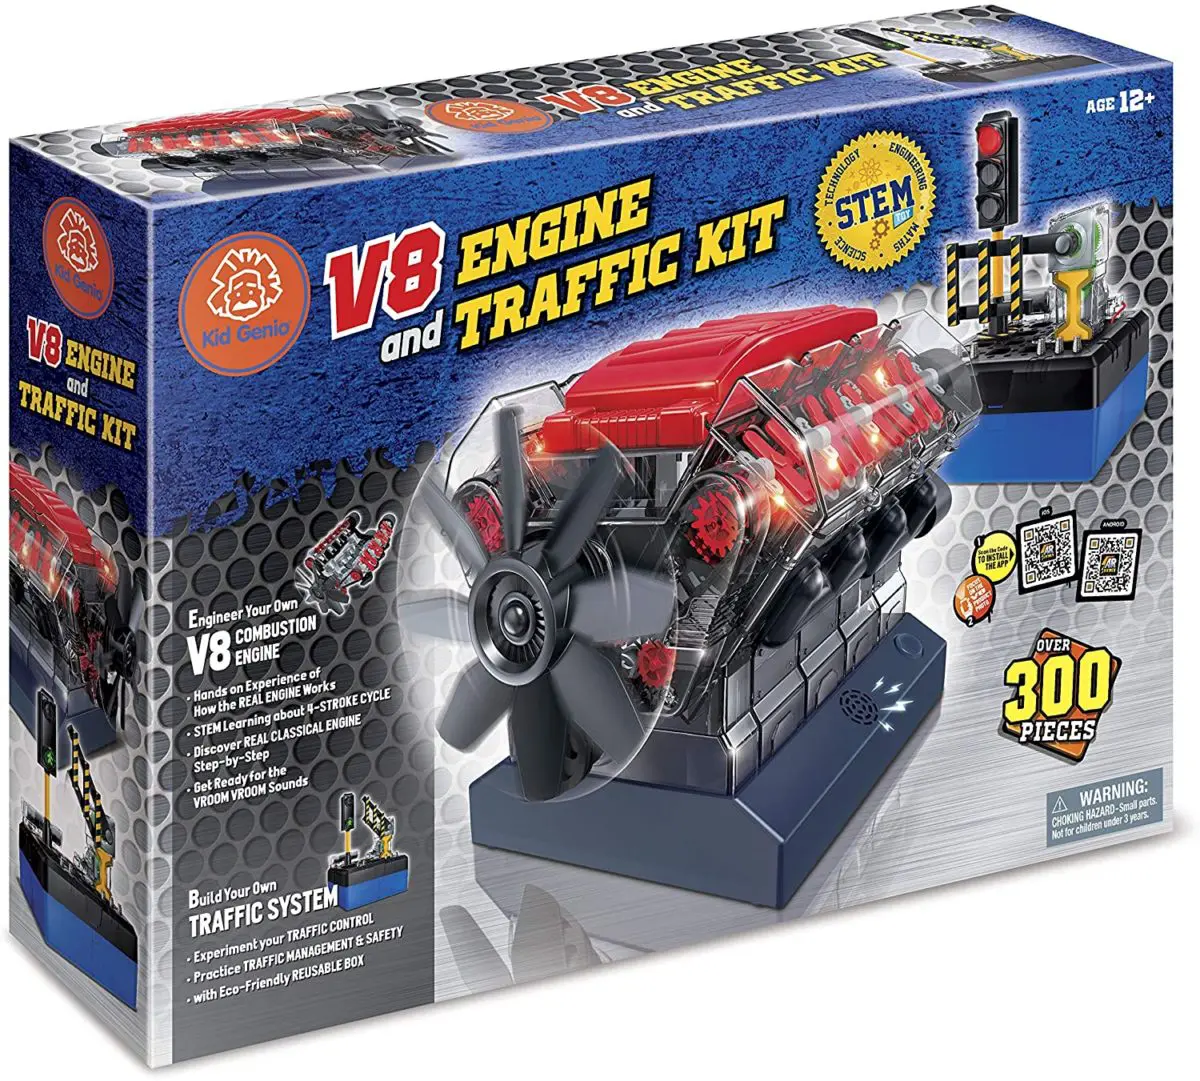 KidGenio Build Your Own 3D Model Engine - Top Toys and Gifts for Ten Year Old Boys 1